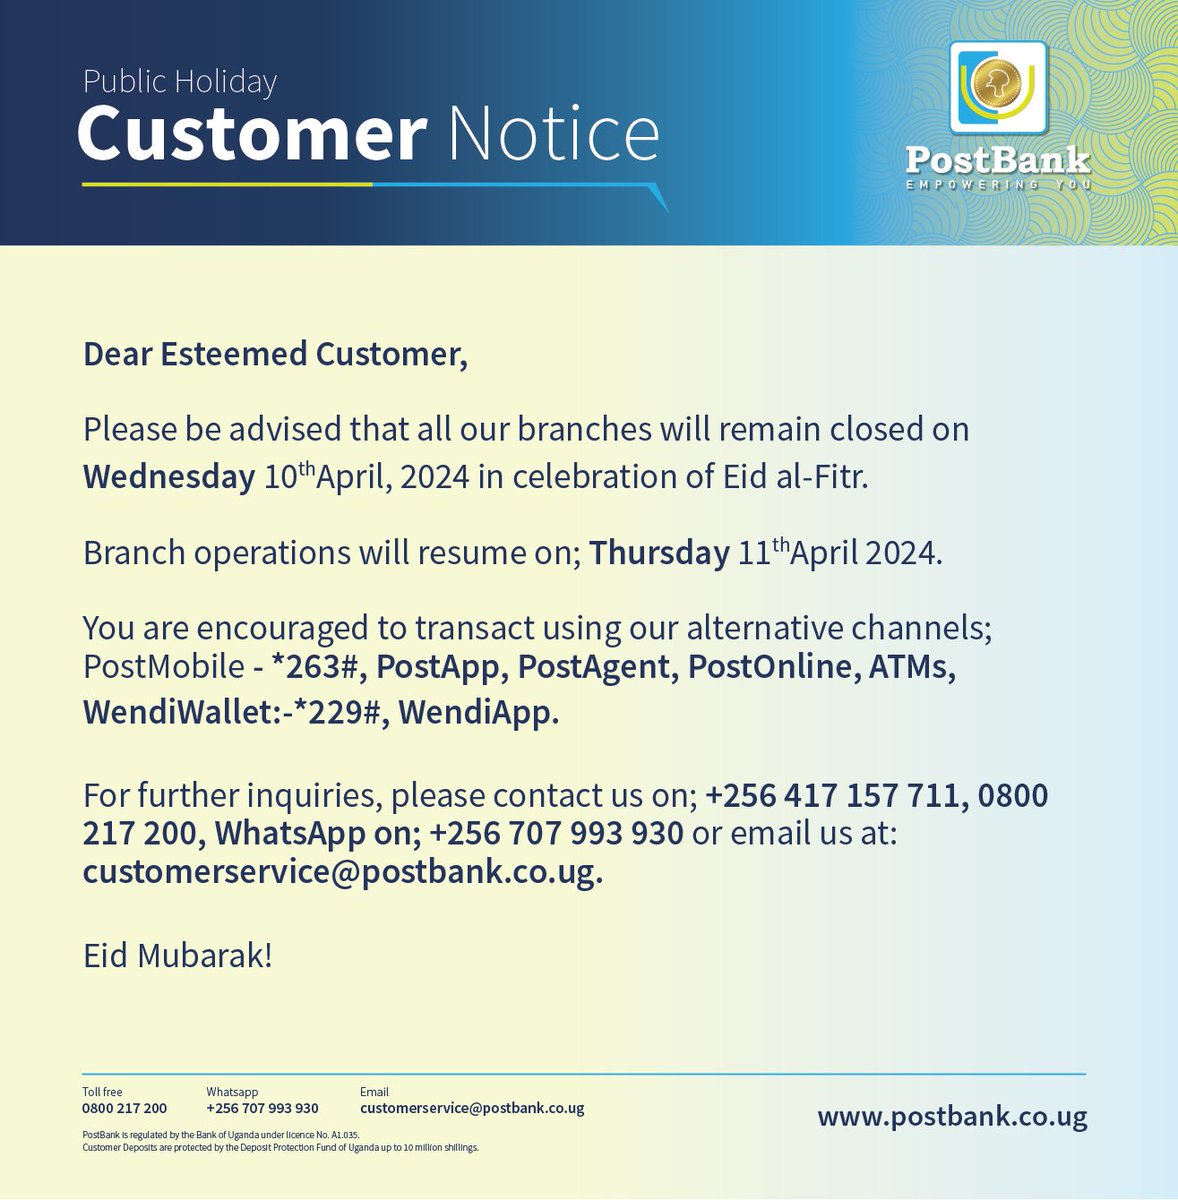 NOTICE! Dear Esteemed Customers, In honour of Eid al-Fitr, all our branches will remain closed tomorrow. We will be back to serve you on Thursday, 11th April 2024. For urgent needs, dial 0800-217-200. Till then, we wish you a blessed Eid Mubarak! #EidAlFitr #BankClosure…